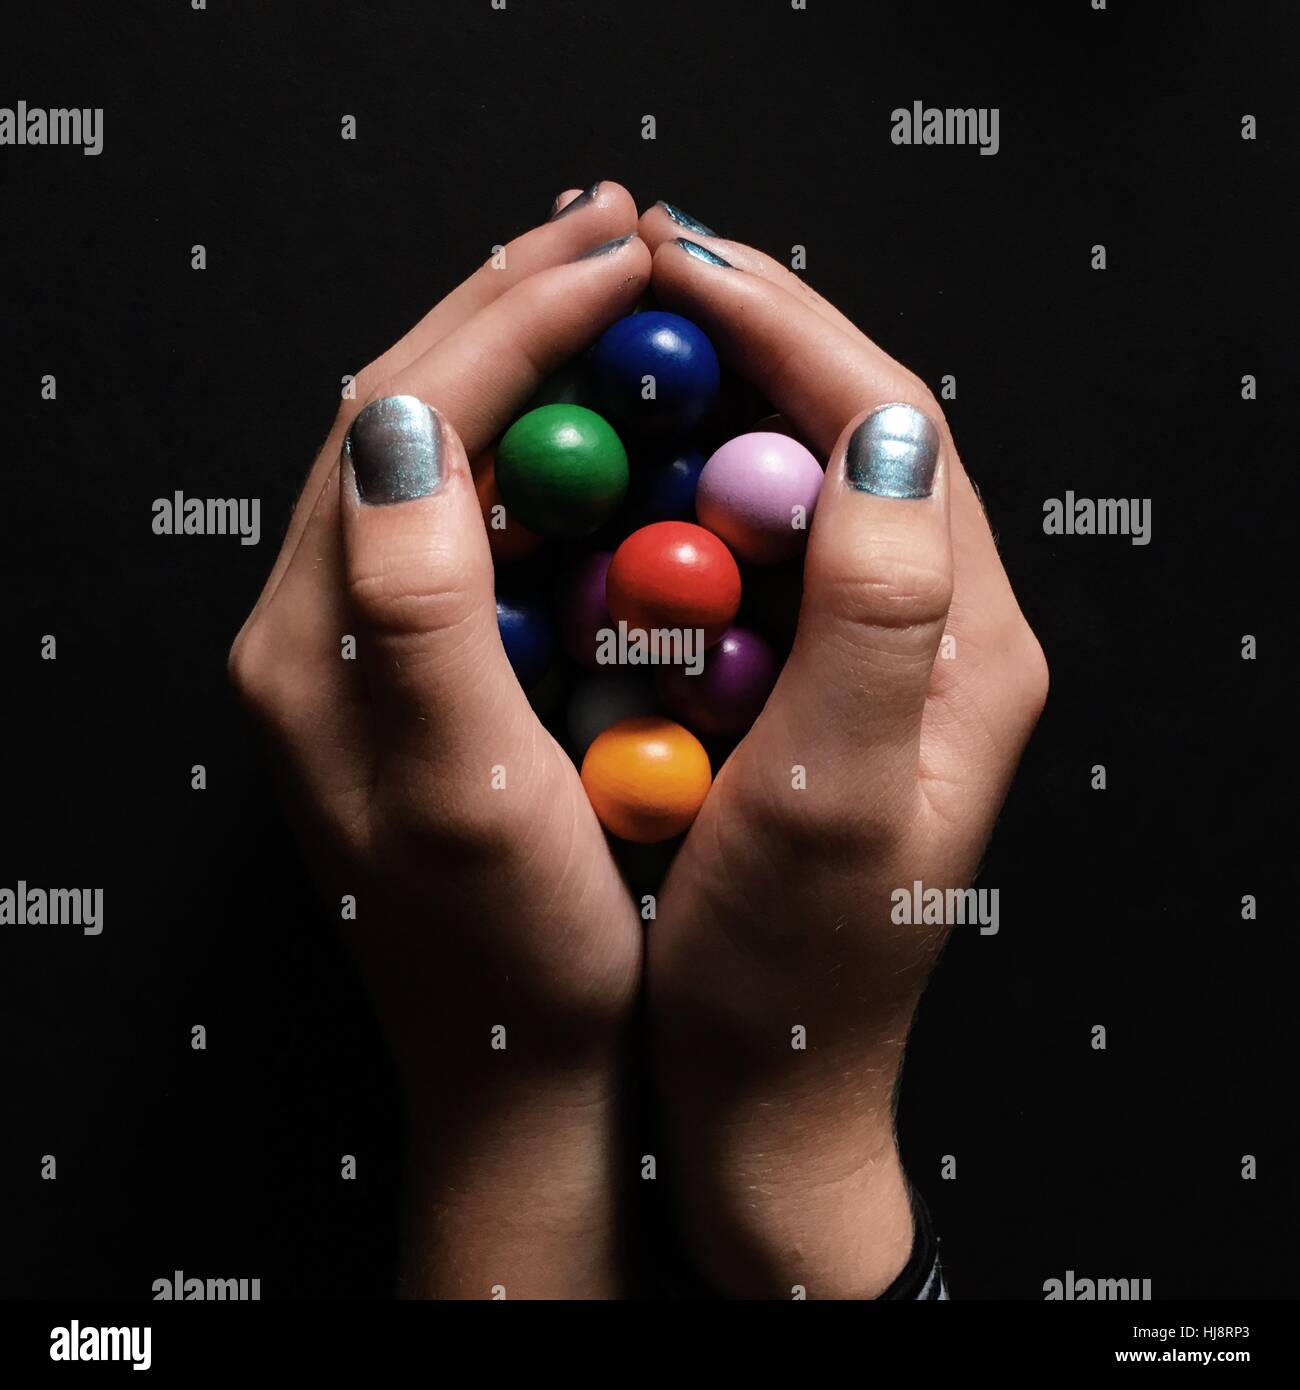 Girl's hands holding marbles Stock Photo